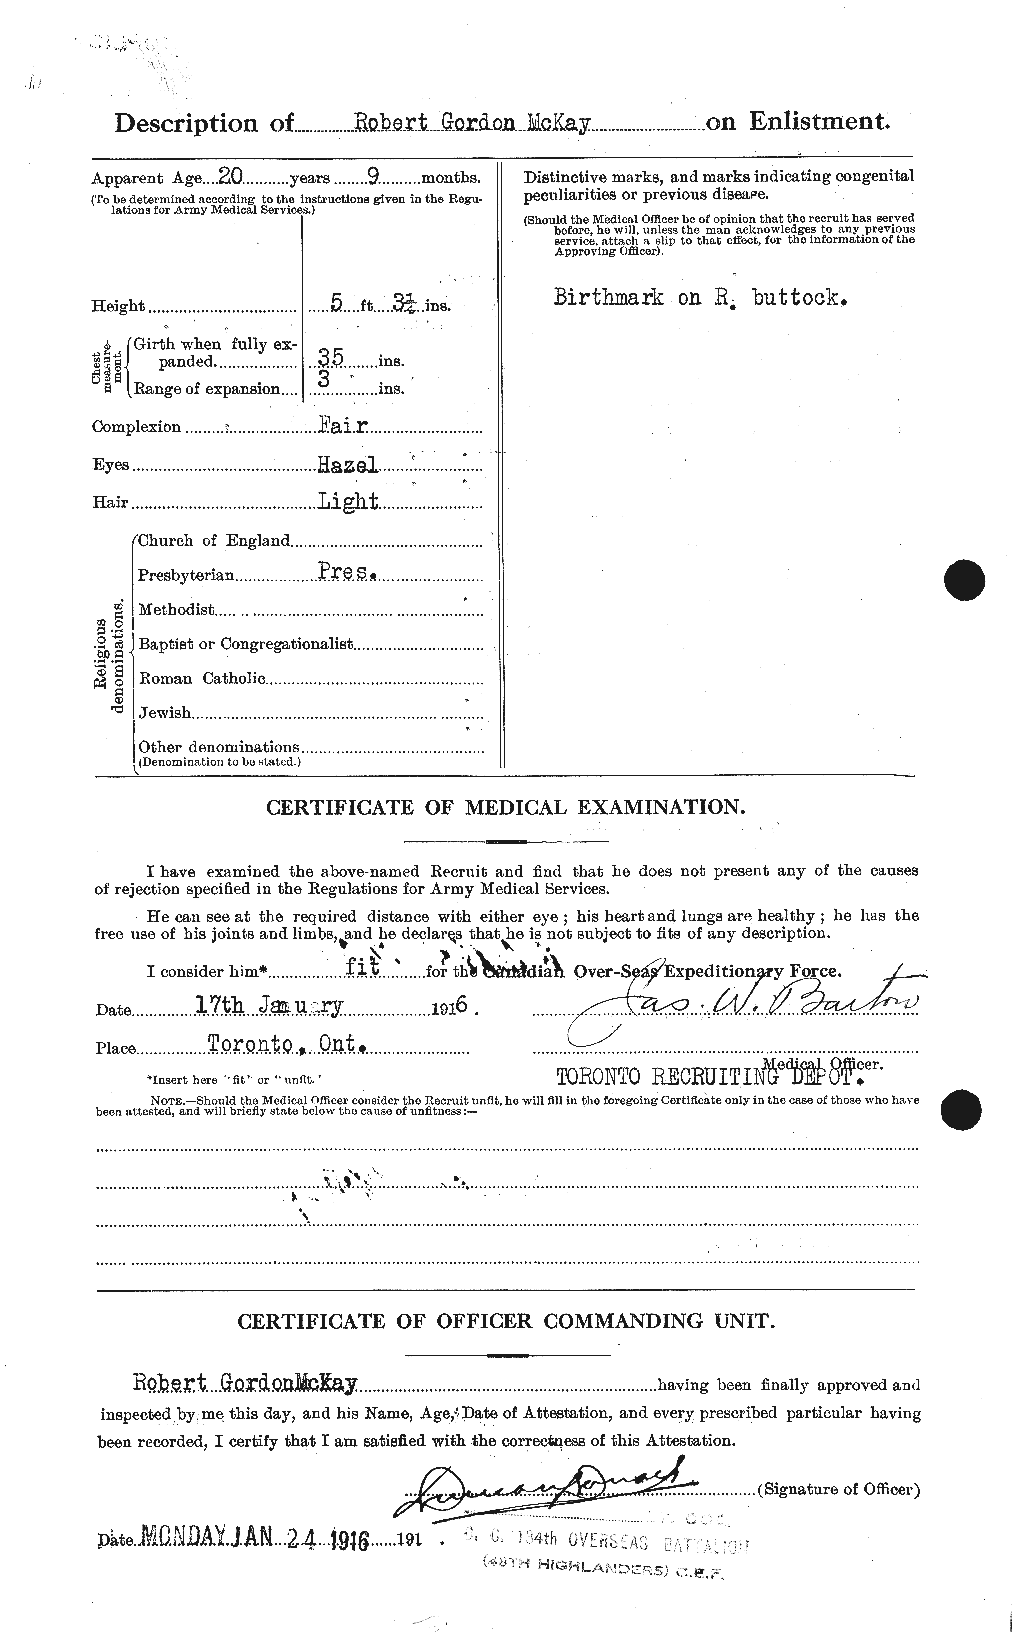 Personnel Records of the First World War - CEF 530096b